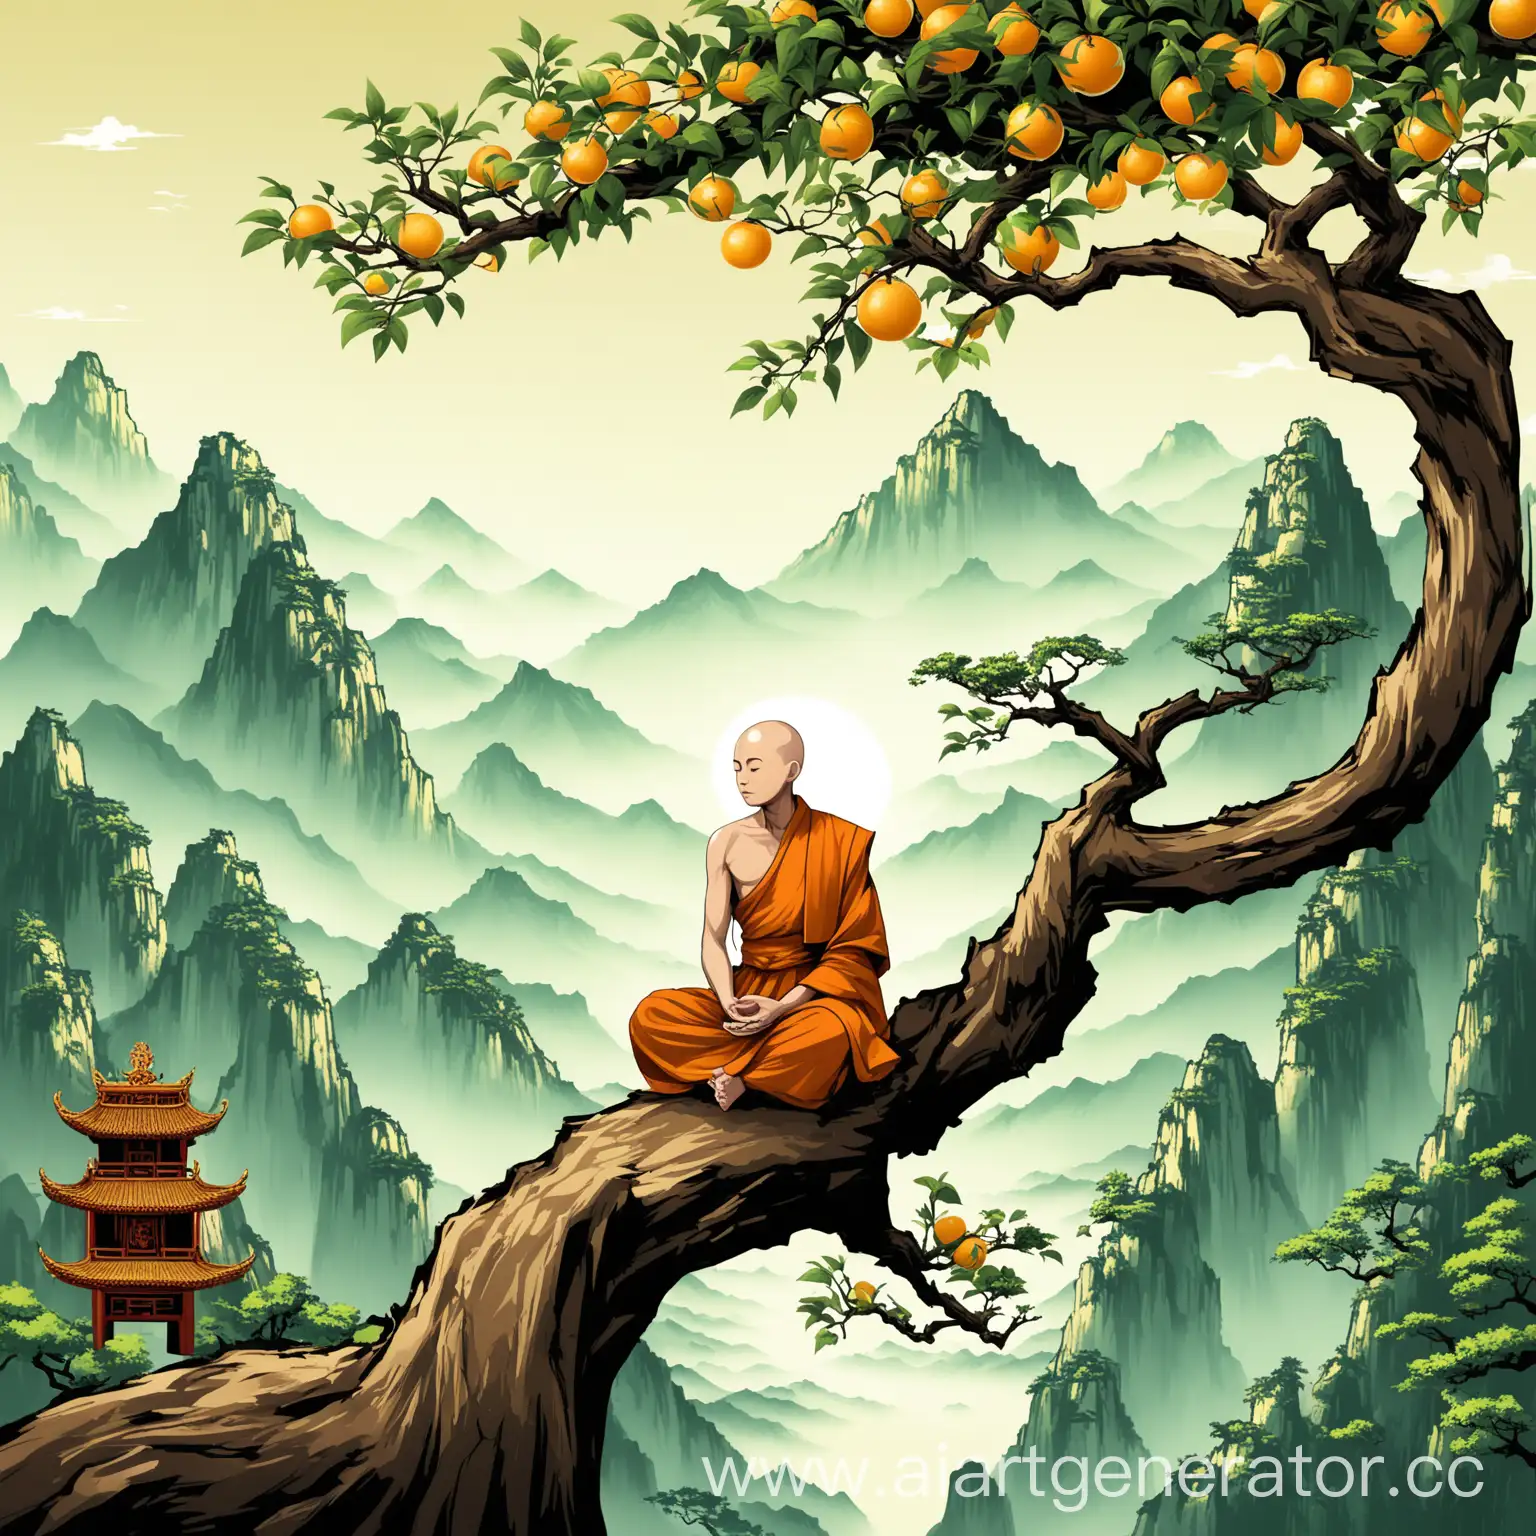 Monk is a fruit on a tree branch in the foreground to which a hand is reaching in the background are Chinese mountains and a monk who is meditating vector design